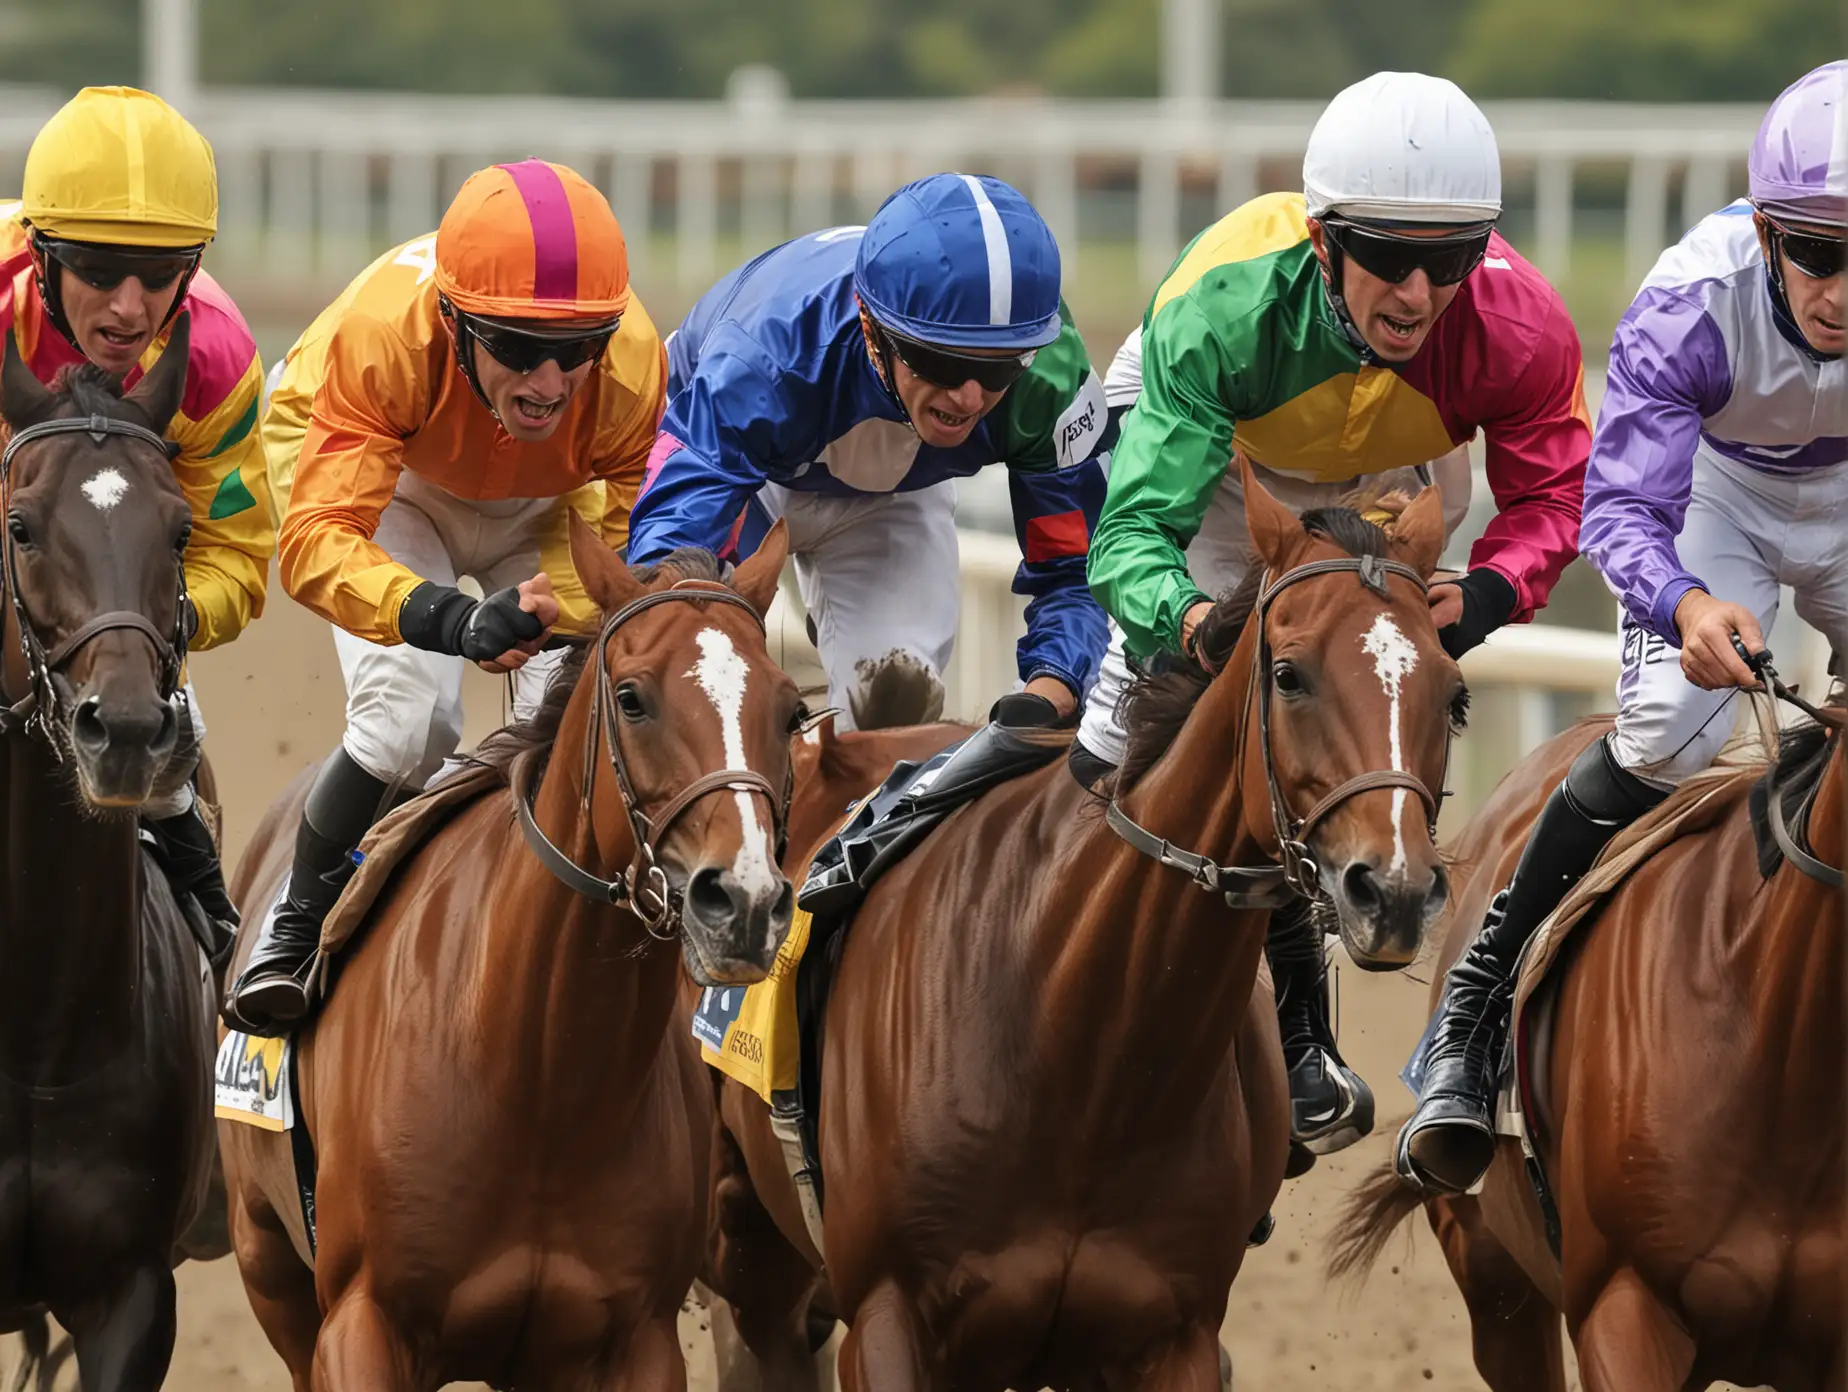 horse racing detail of horses not too crowded headed to the finish line  showing the bright colors of the jockeys and their expression to win the race.